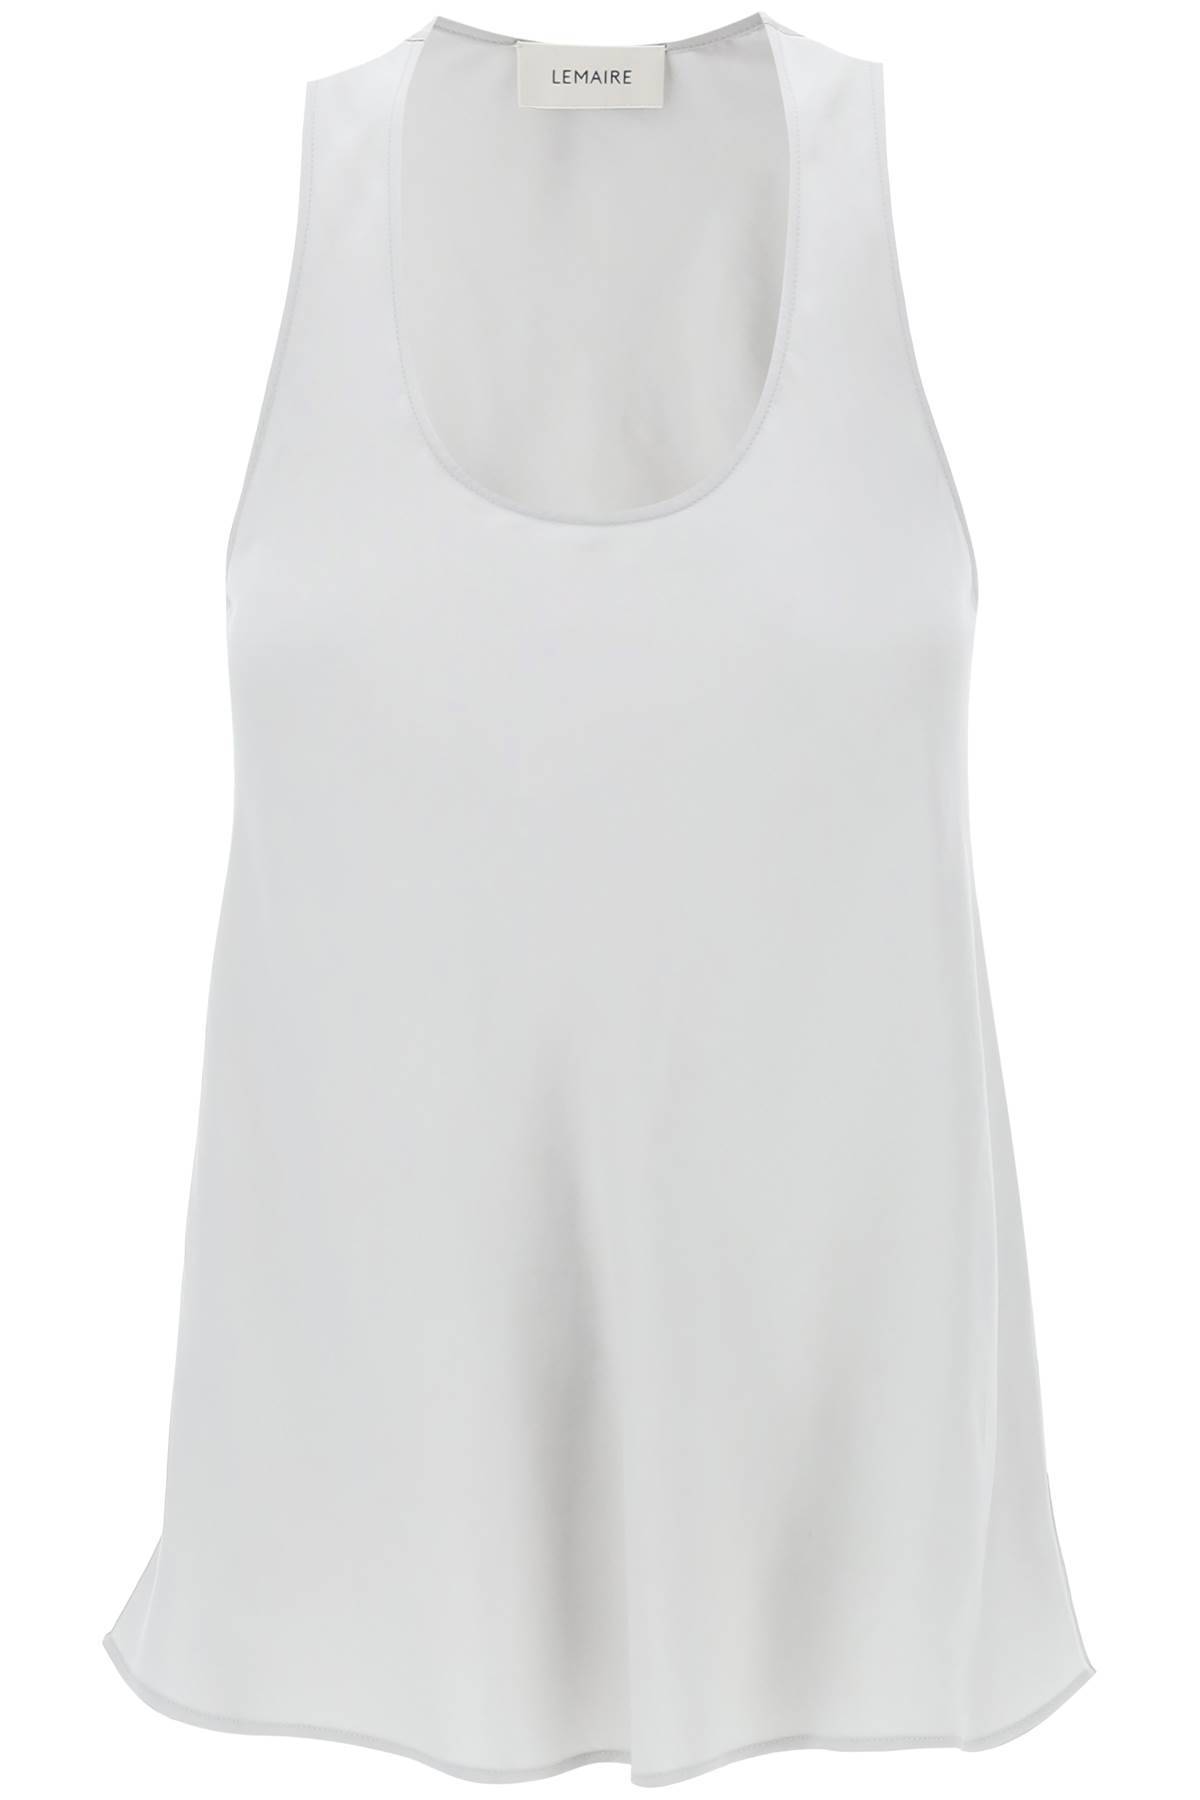 Lemaire LEMAIRE sleeveless top with diagonal